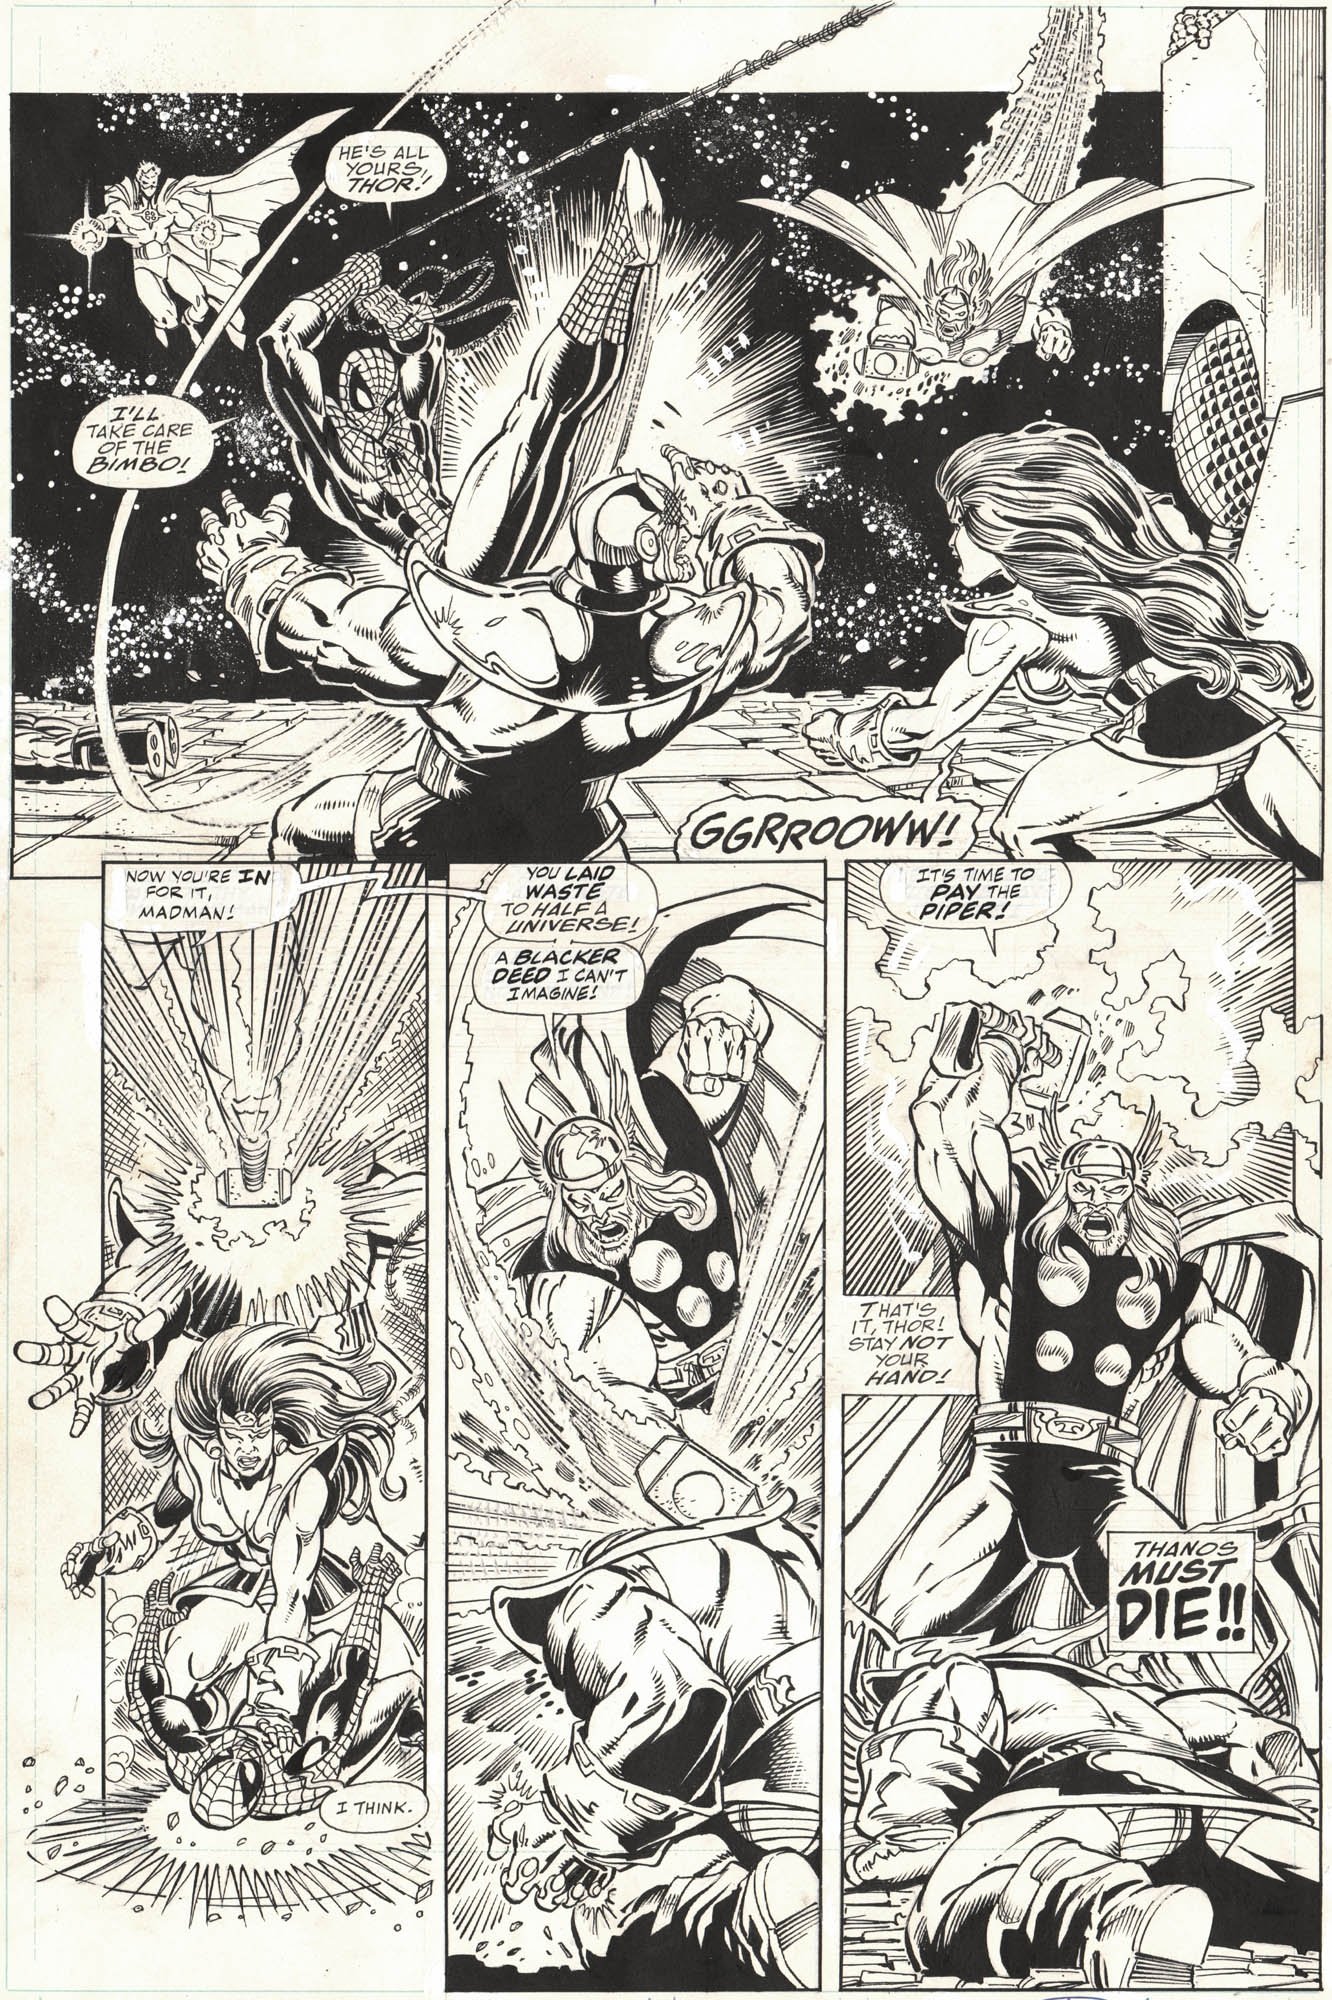 Comic Art Shop :: Original Art Auctions and Exchange: 's Comic  Art Shop :: GEORGE PEREZ AND RON LIM INFINITY GAUNTLET #4 PAGE 28 (Epic  battle page: Spider-Man and Thor battle Thanos